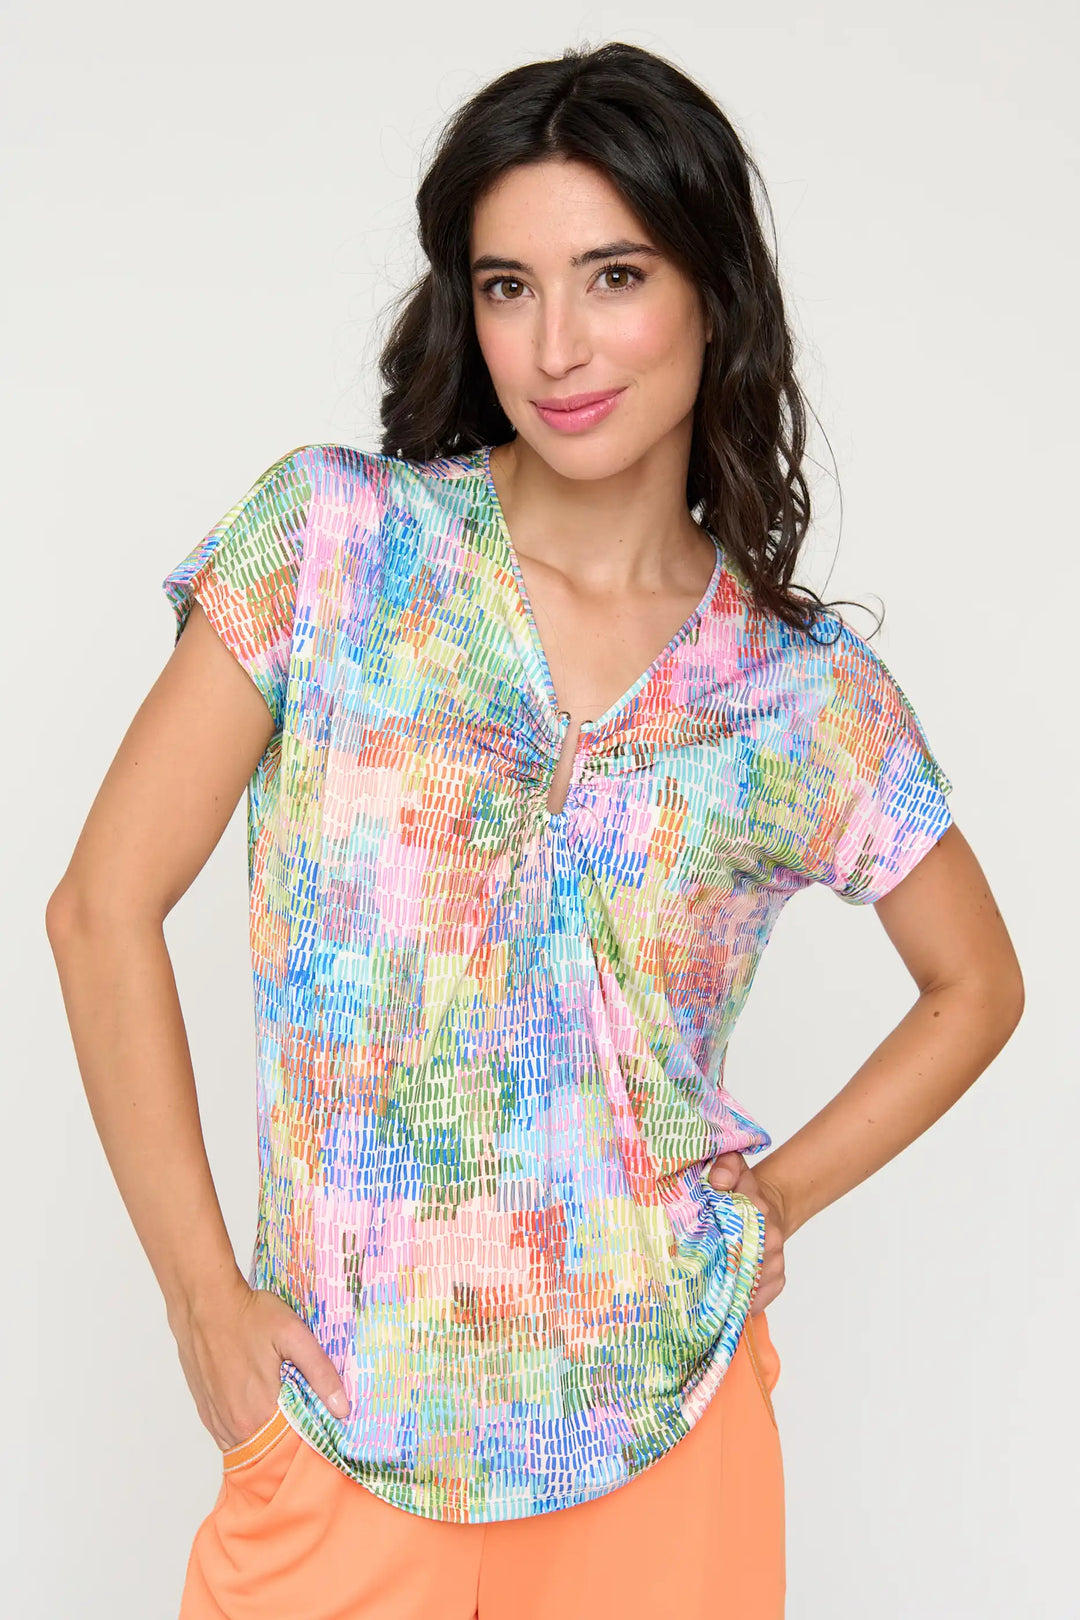 Model wearing the 'Diega' style blouse with a bright, multi-coloured abstract print, cap sleeves, and a V-neckline, tucked into peach-coloured trousers.